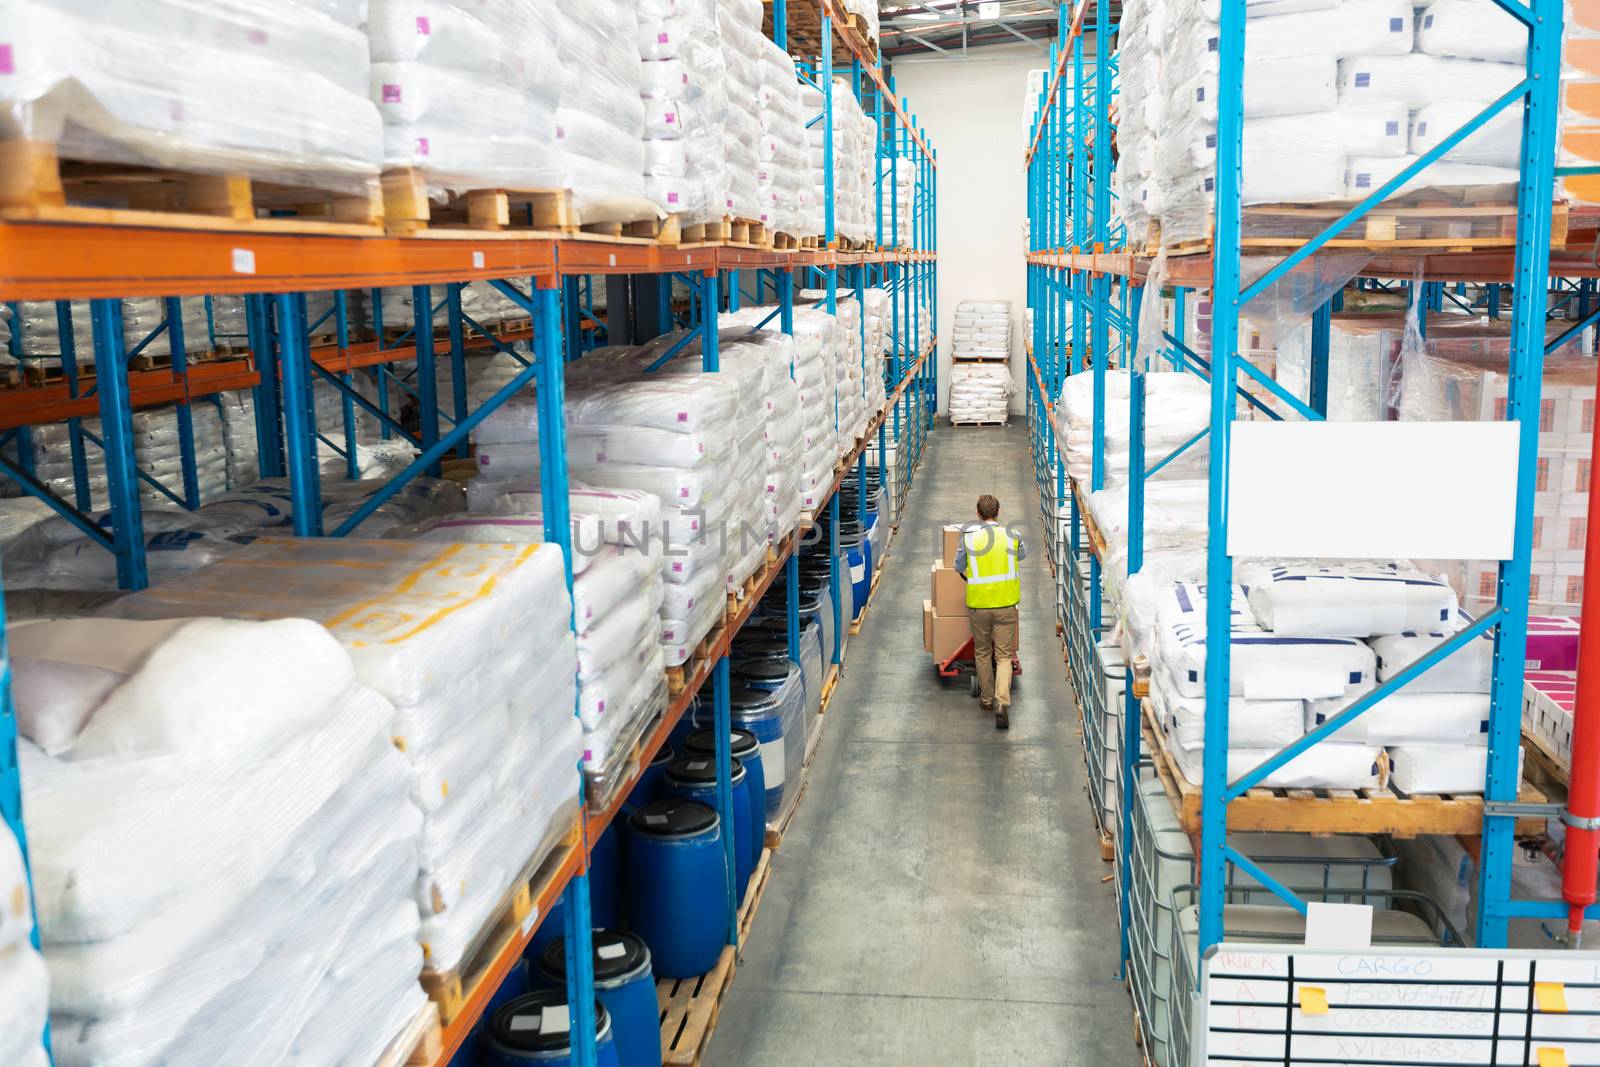 High angle view of hardworking mature African-american worker carrying boxes on pallet jack in warehouse. This is a freight transportation and distribution warehouse. Industrial and industrial workers concept